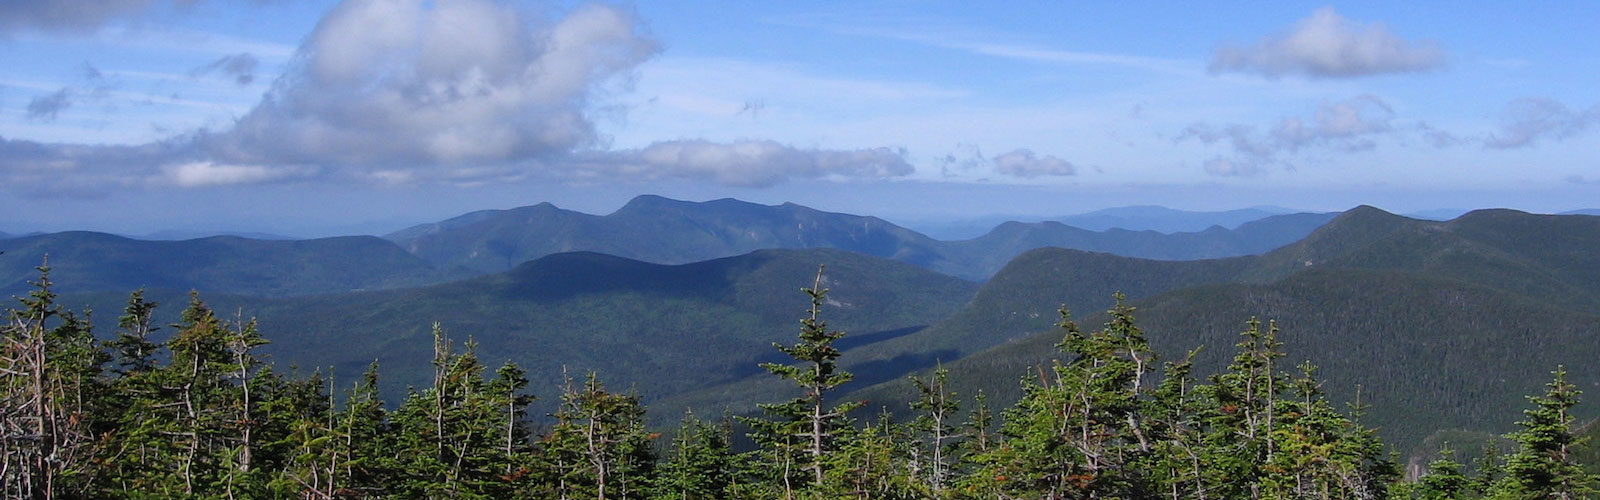 View of the mountain and balsam fir trees along one of the Mountain Birdwatch routes.